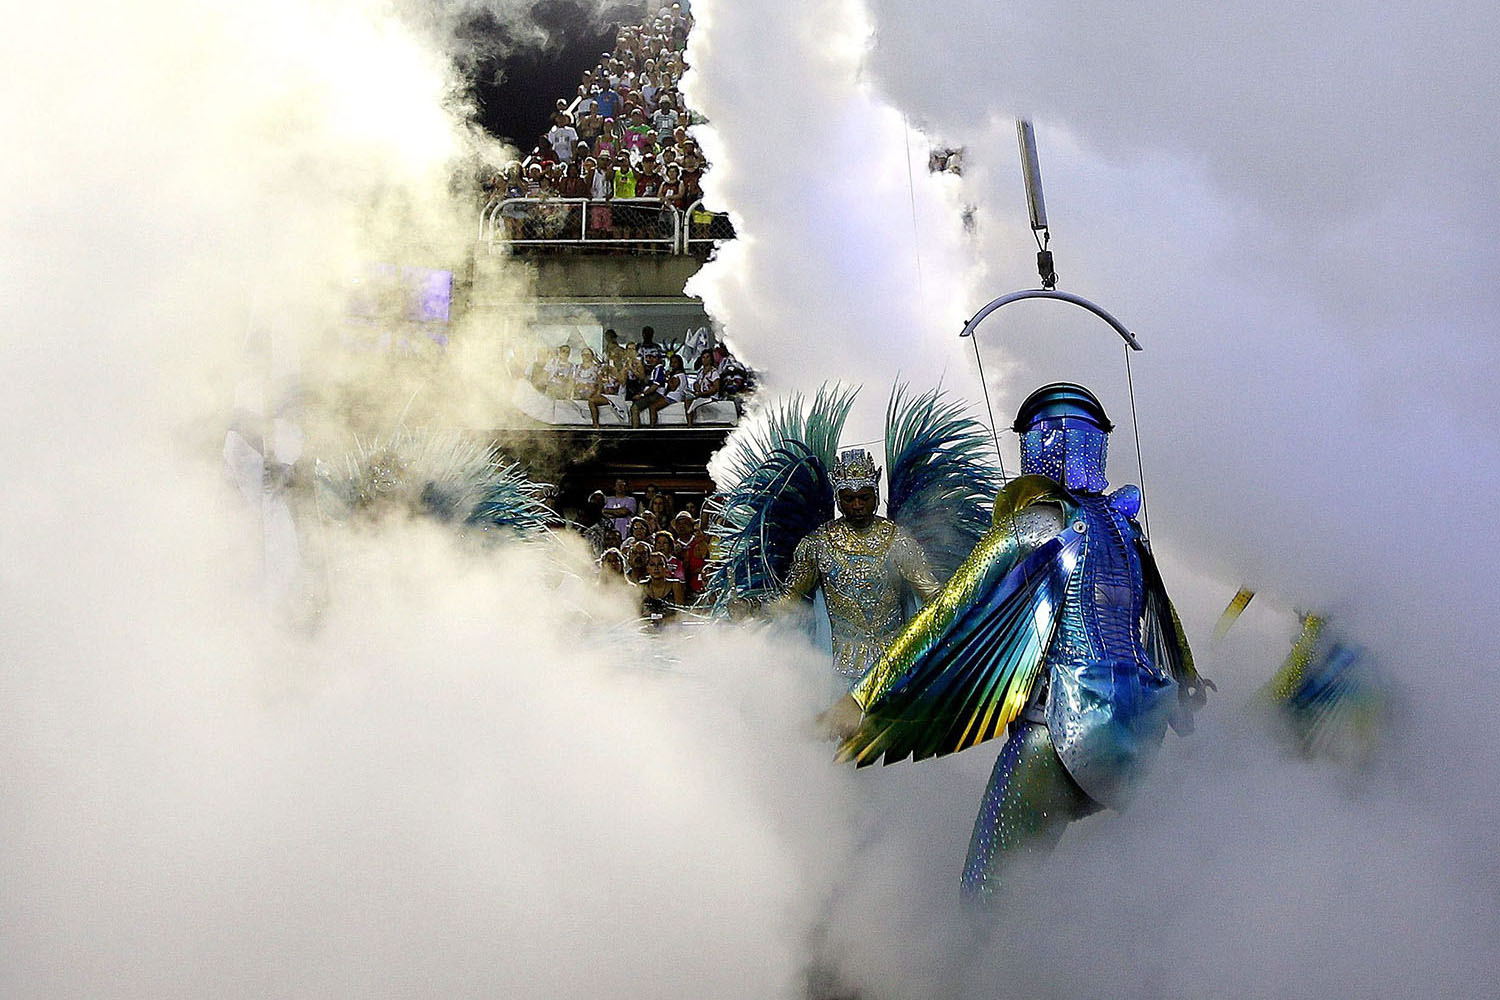 Mar. 3,  2014. Members of the 'Beija-Flor' samba school perform during celebrations of the Carnival at the sambadrome in Rio de Janeiro, Brazil.